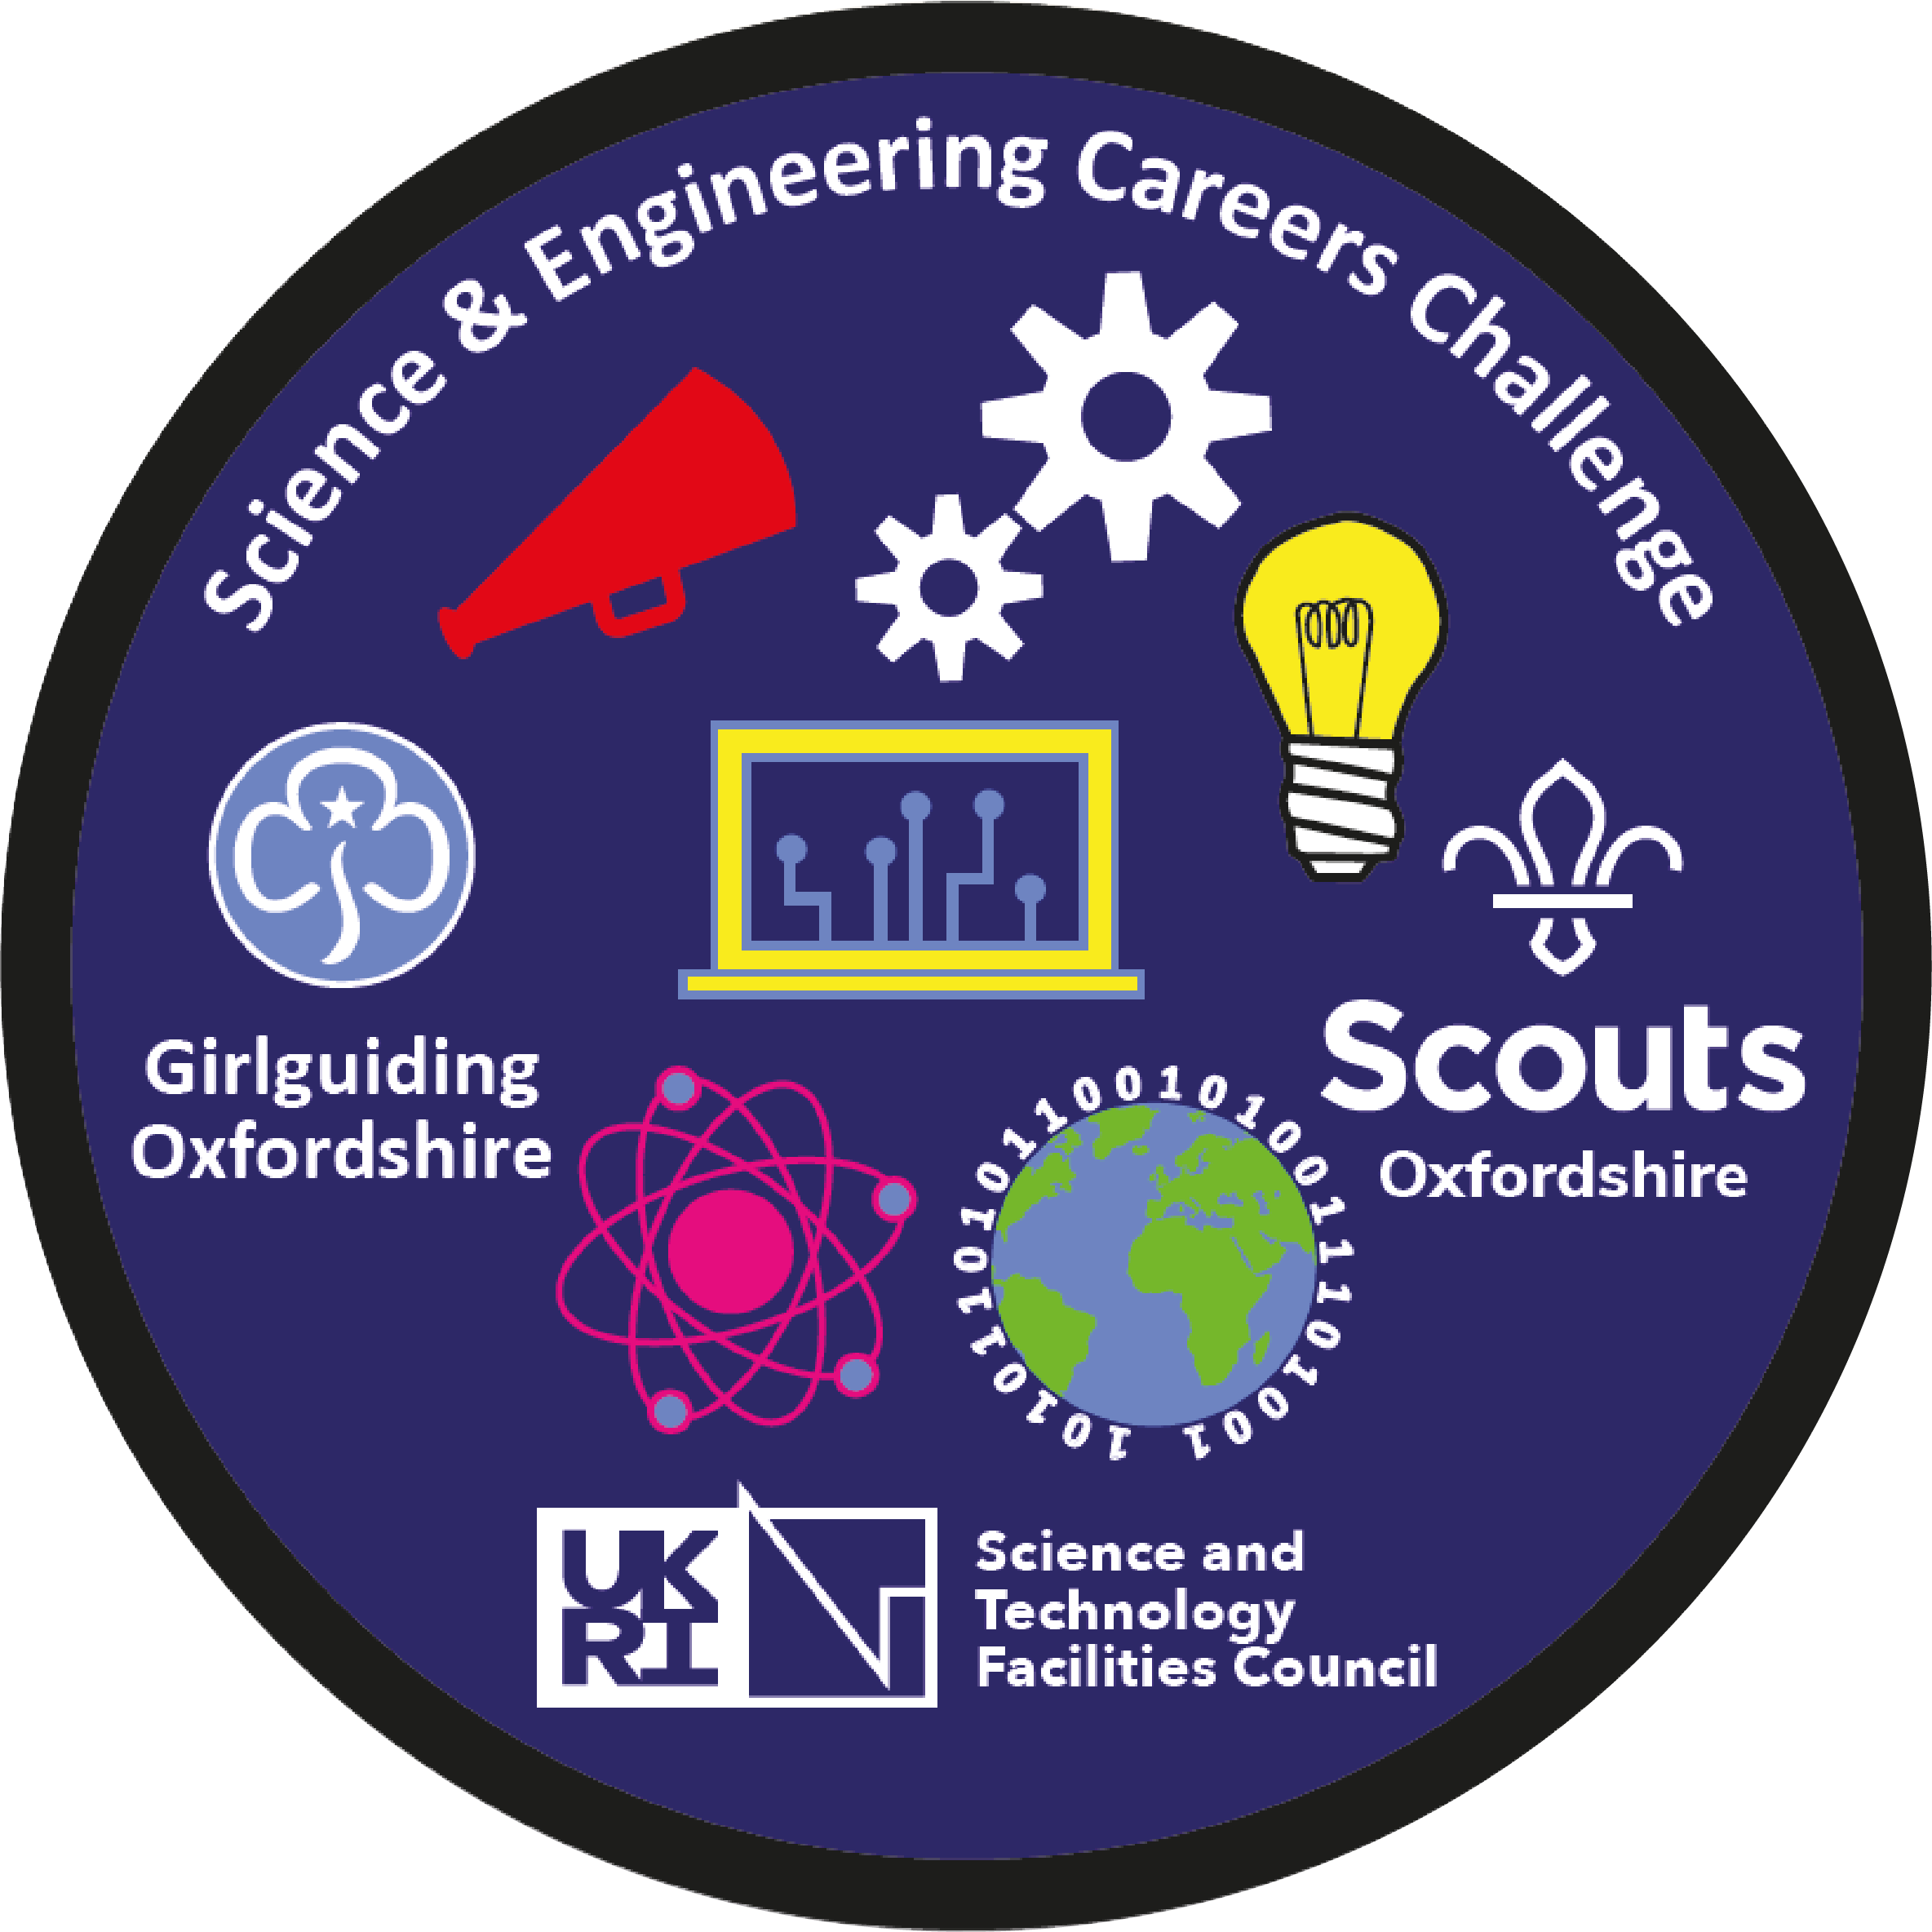 The badge design with Oxfordshire Girlguiding and Scouts